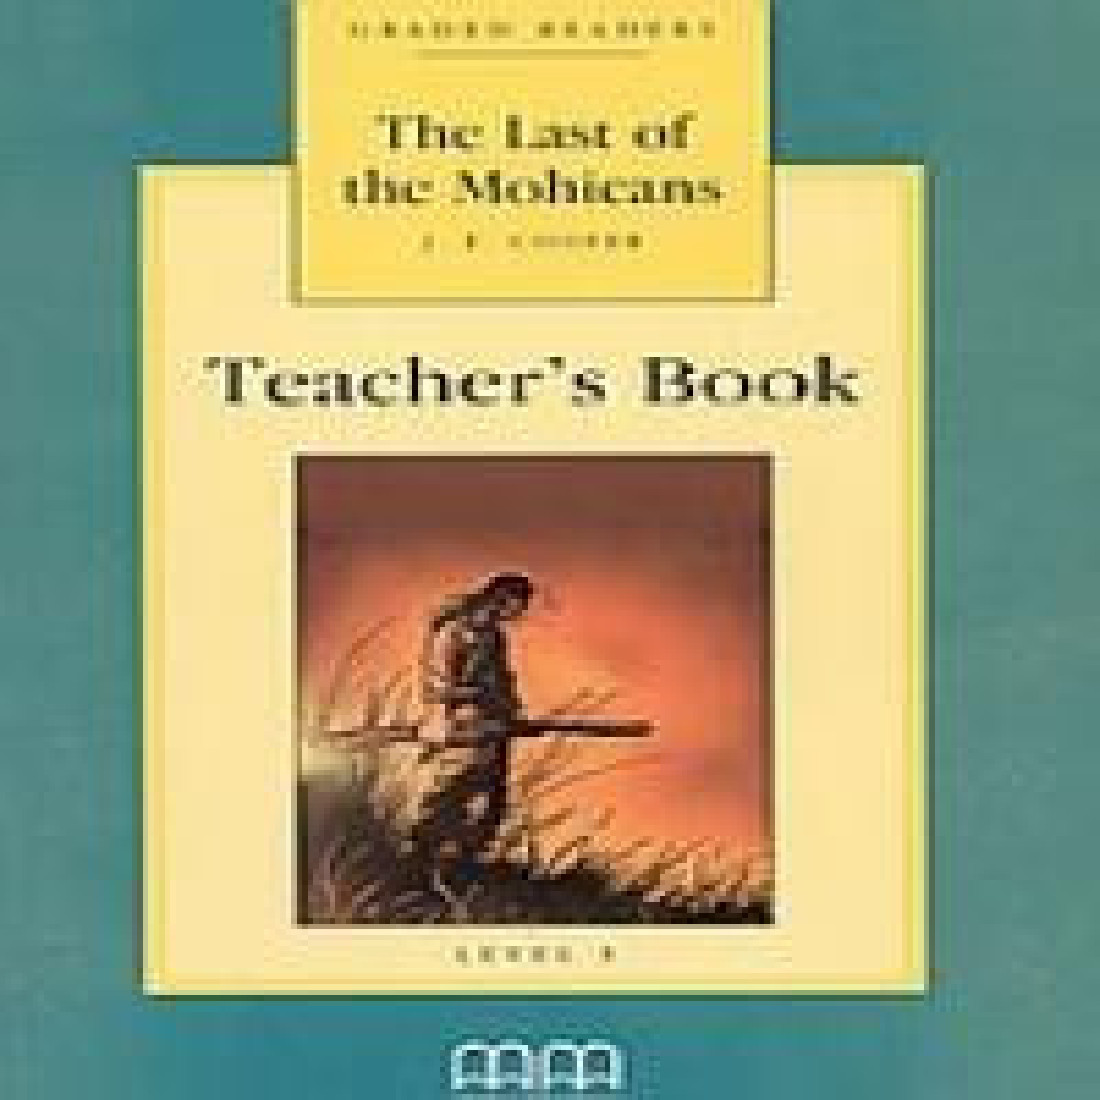 LAST OF THE MOHICANS TEACHERS BOOK (V.2)